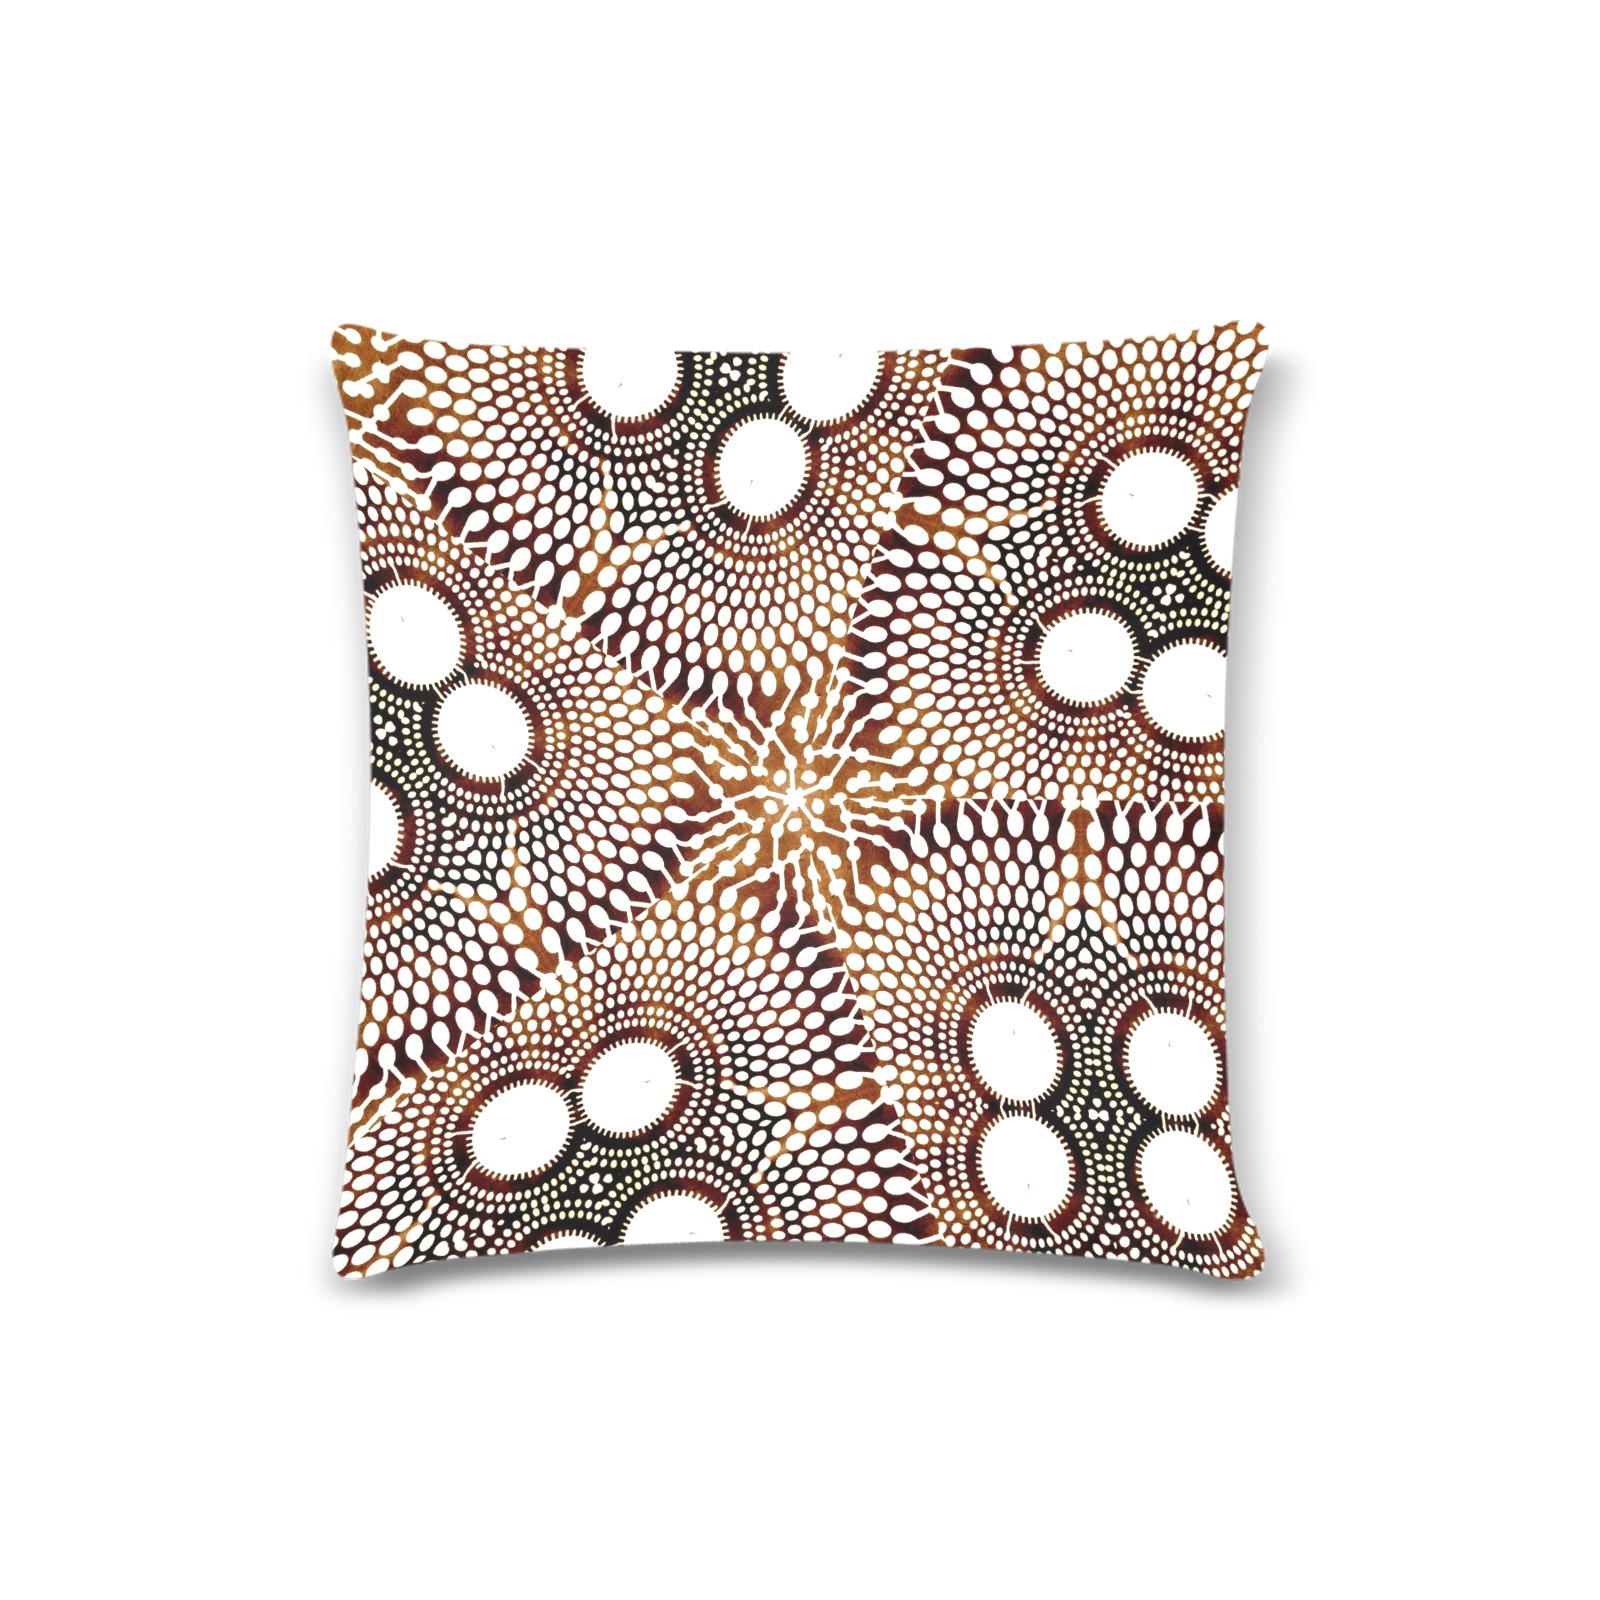 AFRICAN PRINT PATTERN 4 Custom Zippered Pillow Case 16"x16" (one side)